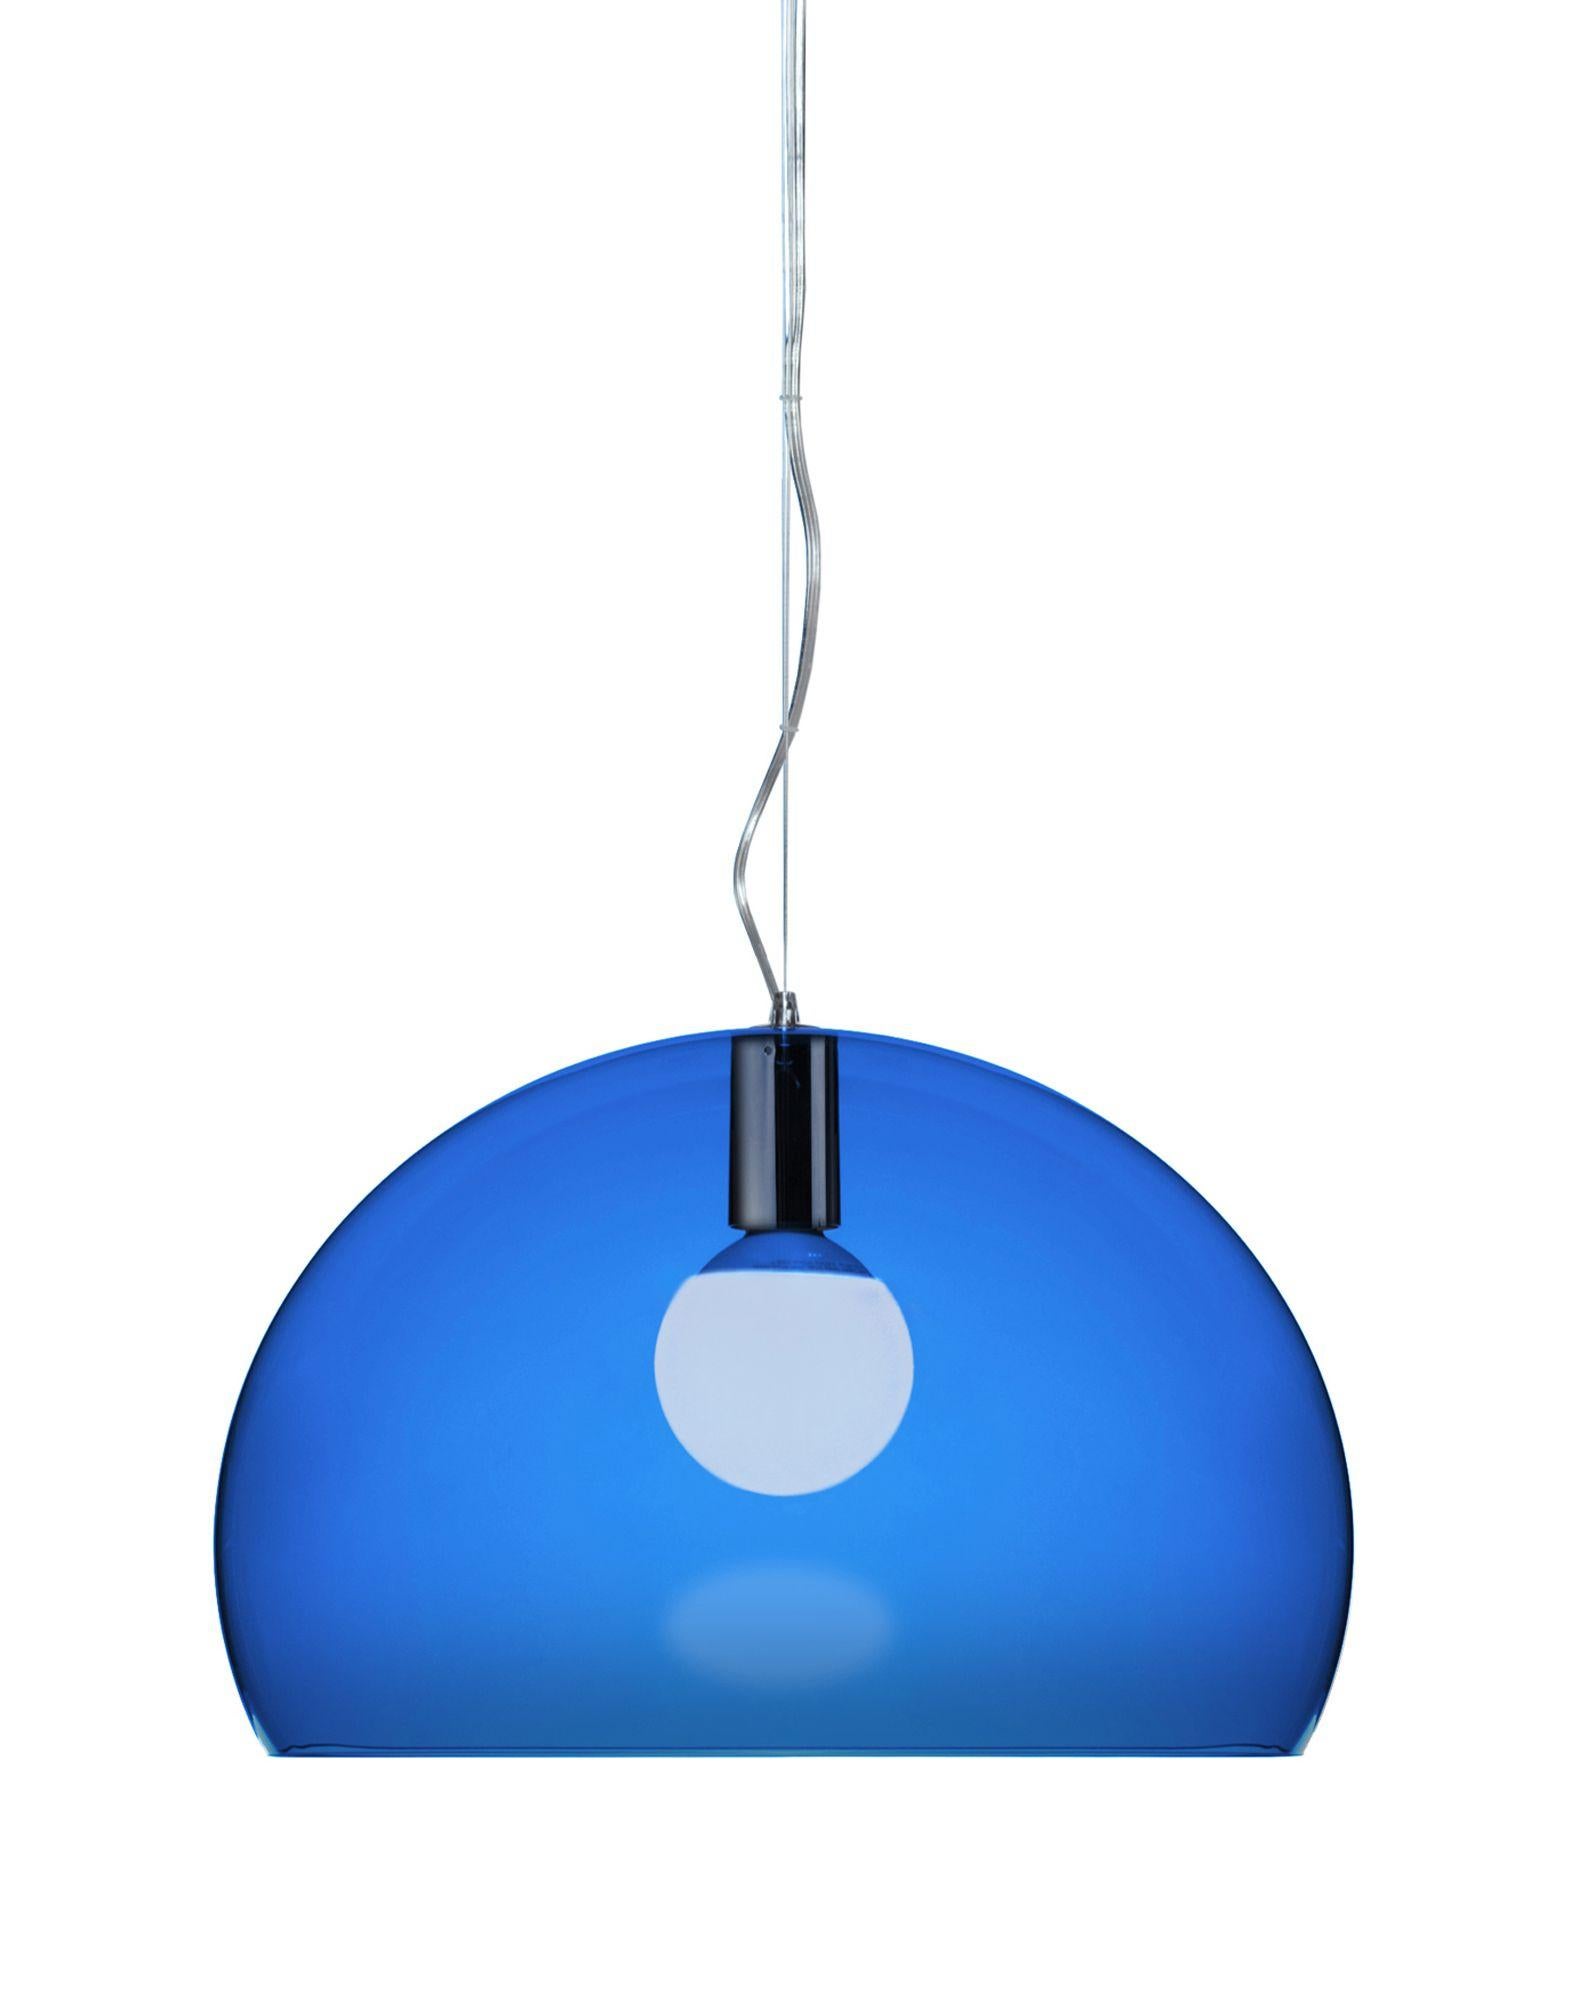 An essential lamp which is characterized by the “subtle interpretations of the theme. Made in transparent methacrylate in blue, the cover is not perfectly hemispherical but the cut-off is underneath the height of the diameter to collect the most